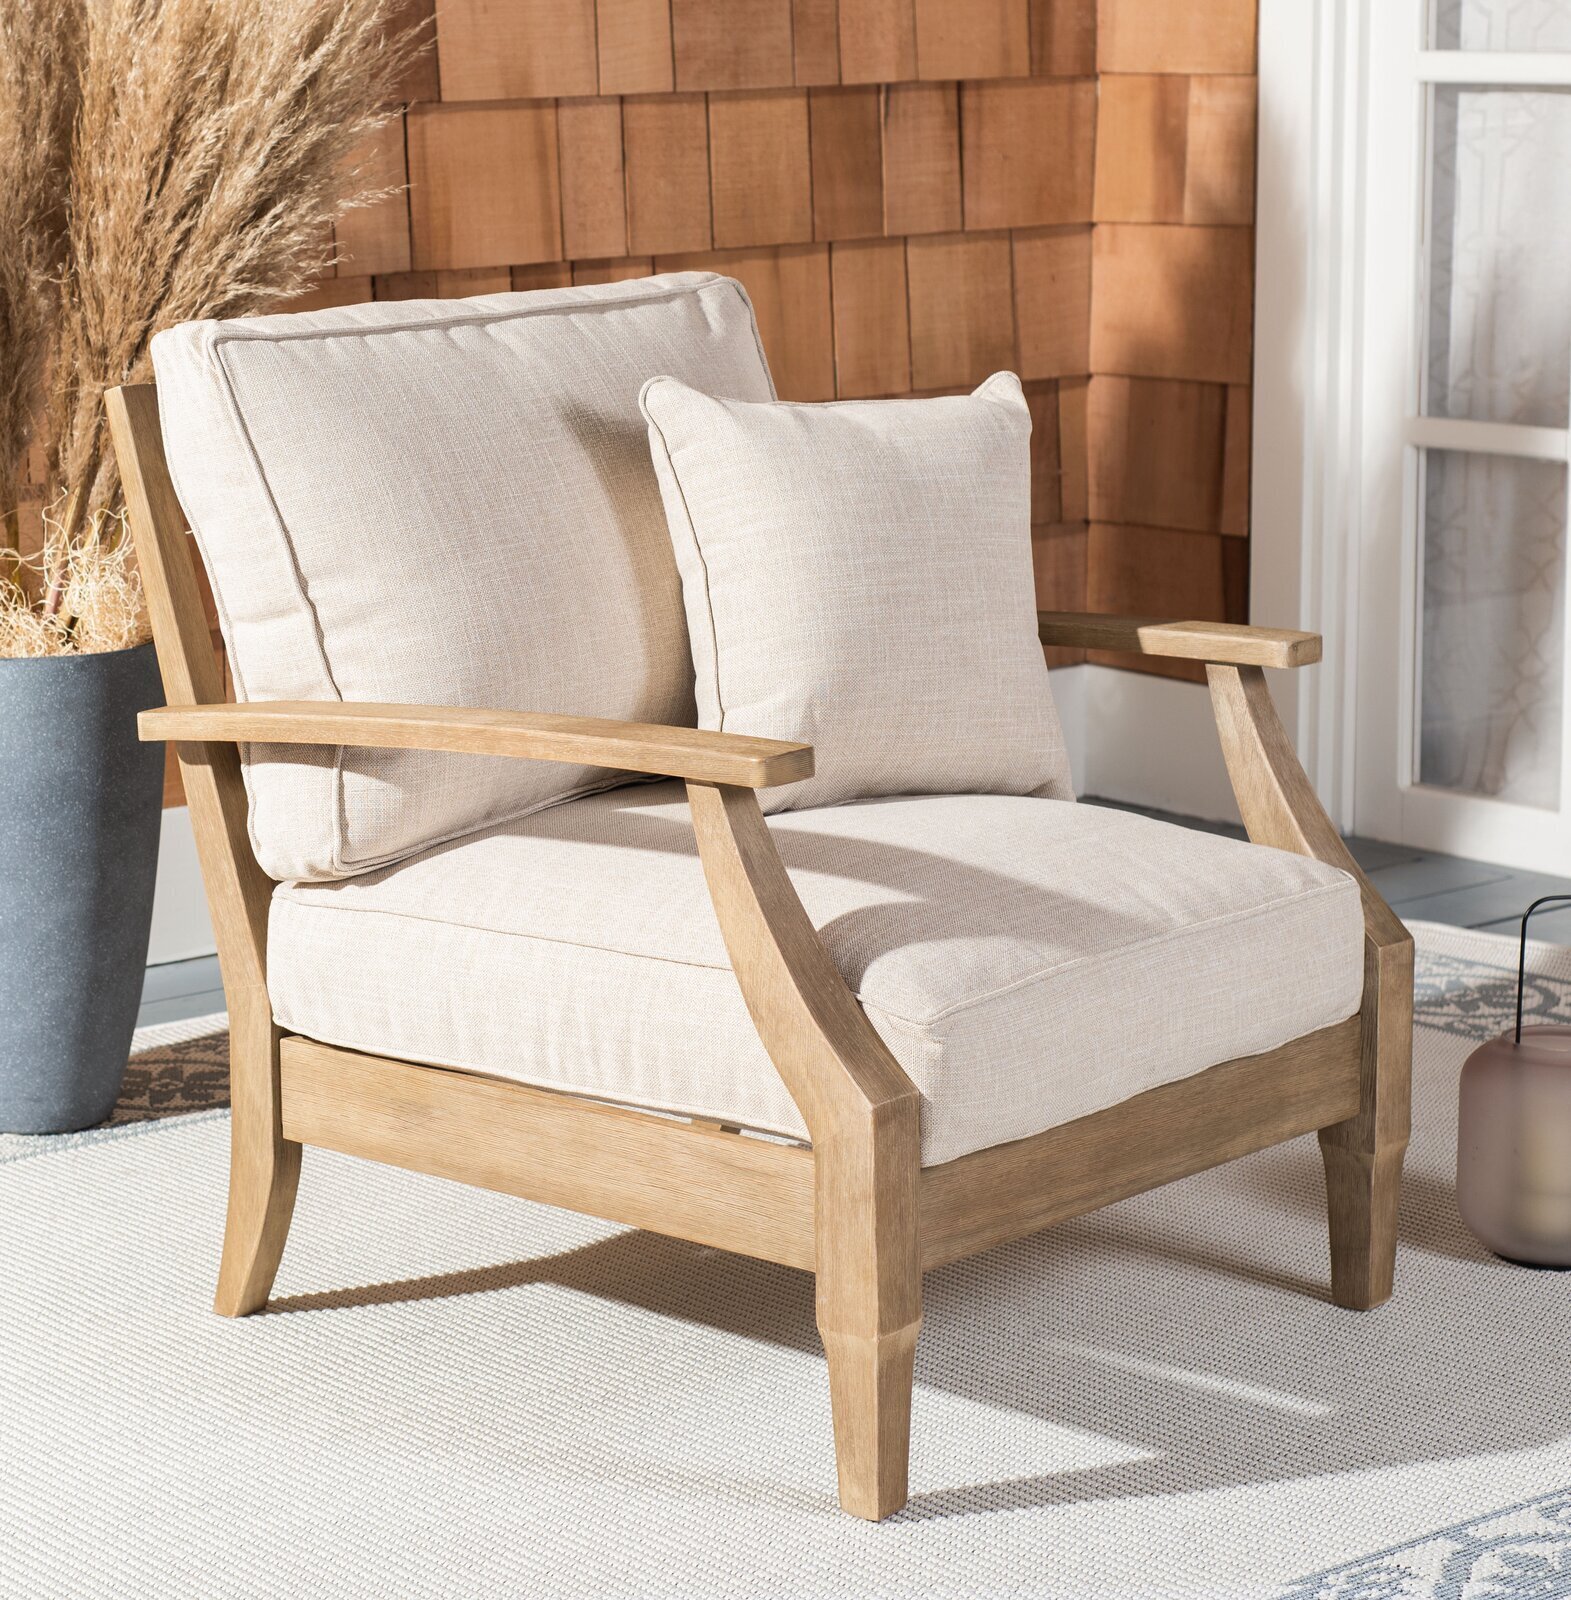 Cushioned outdoor patio chair